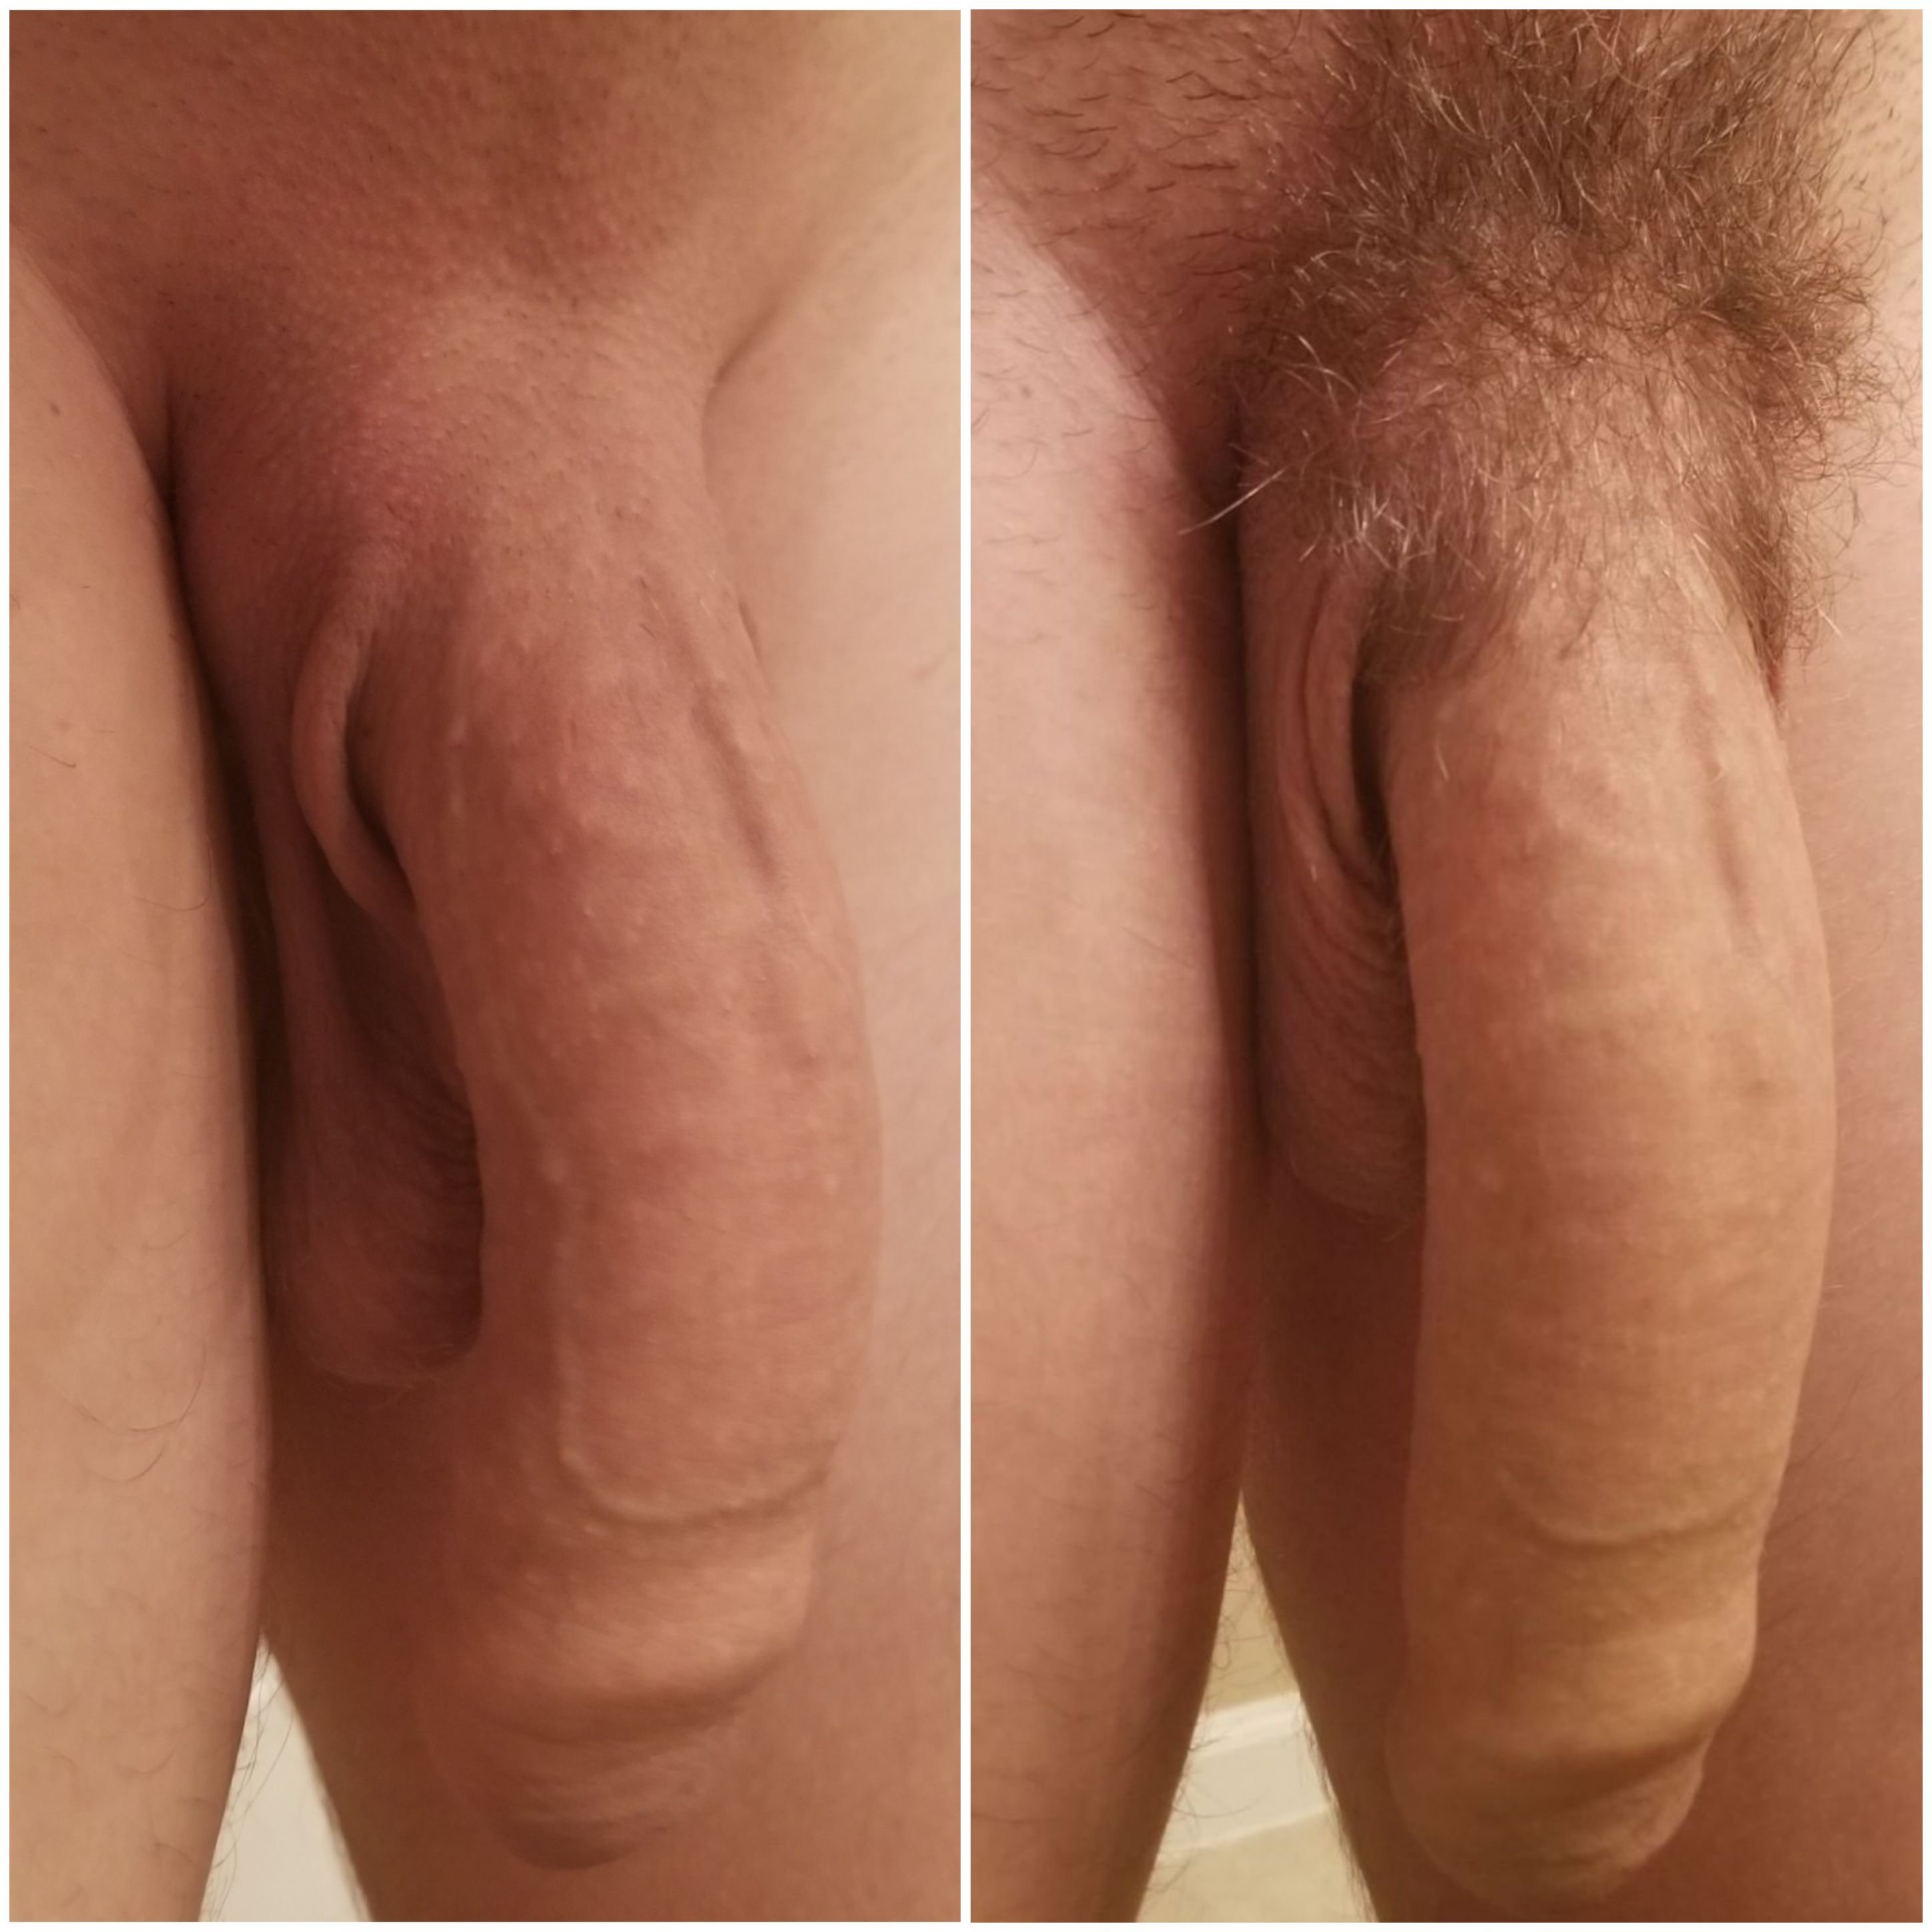 A little shaved/unshaved softie